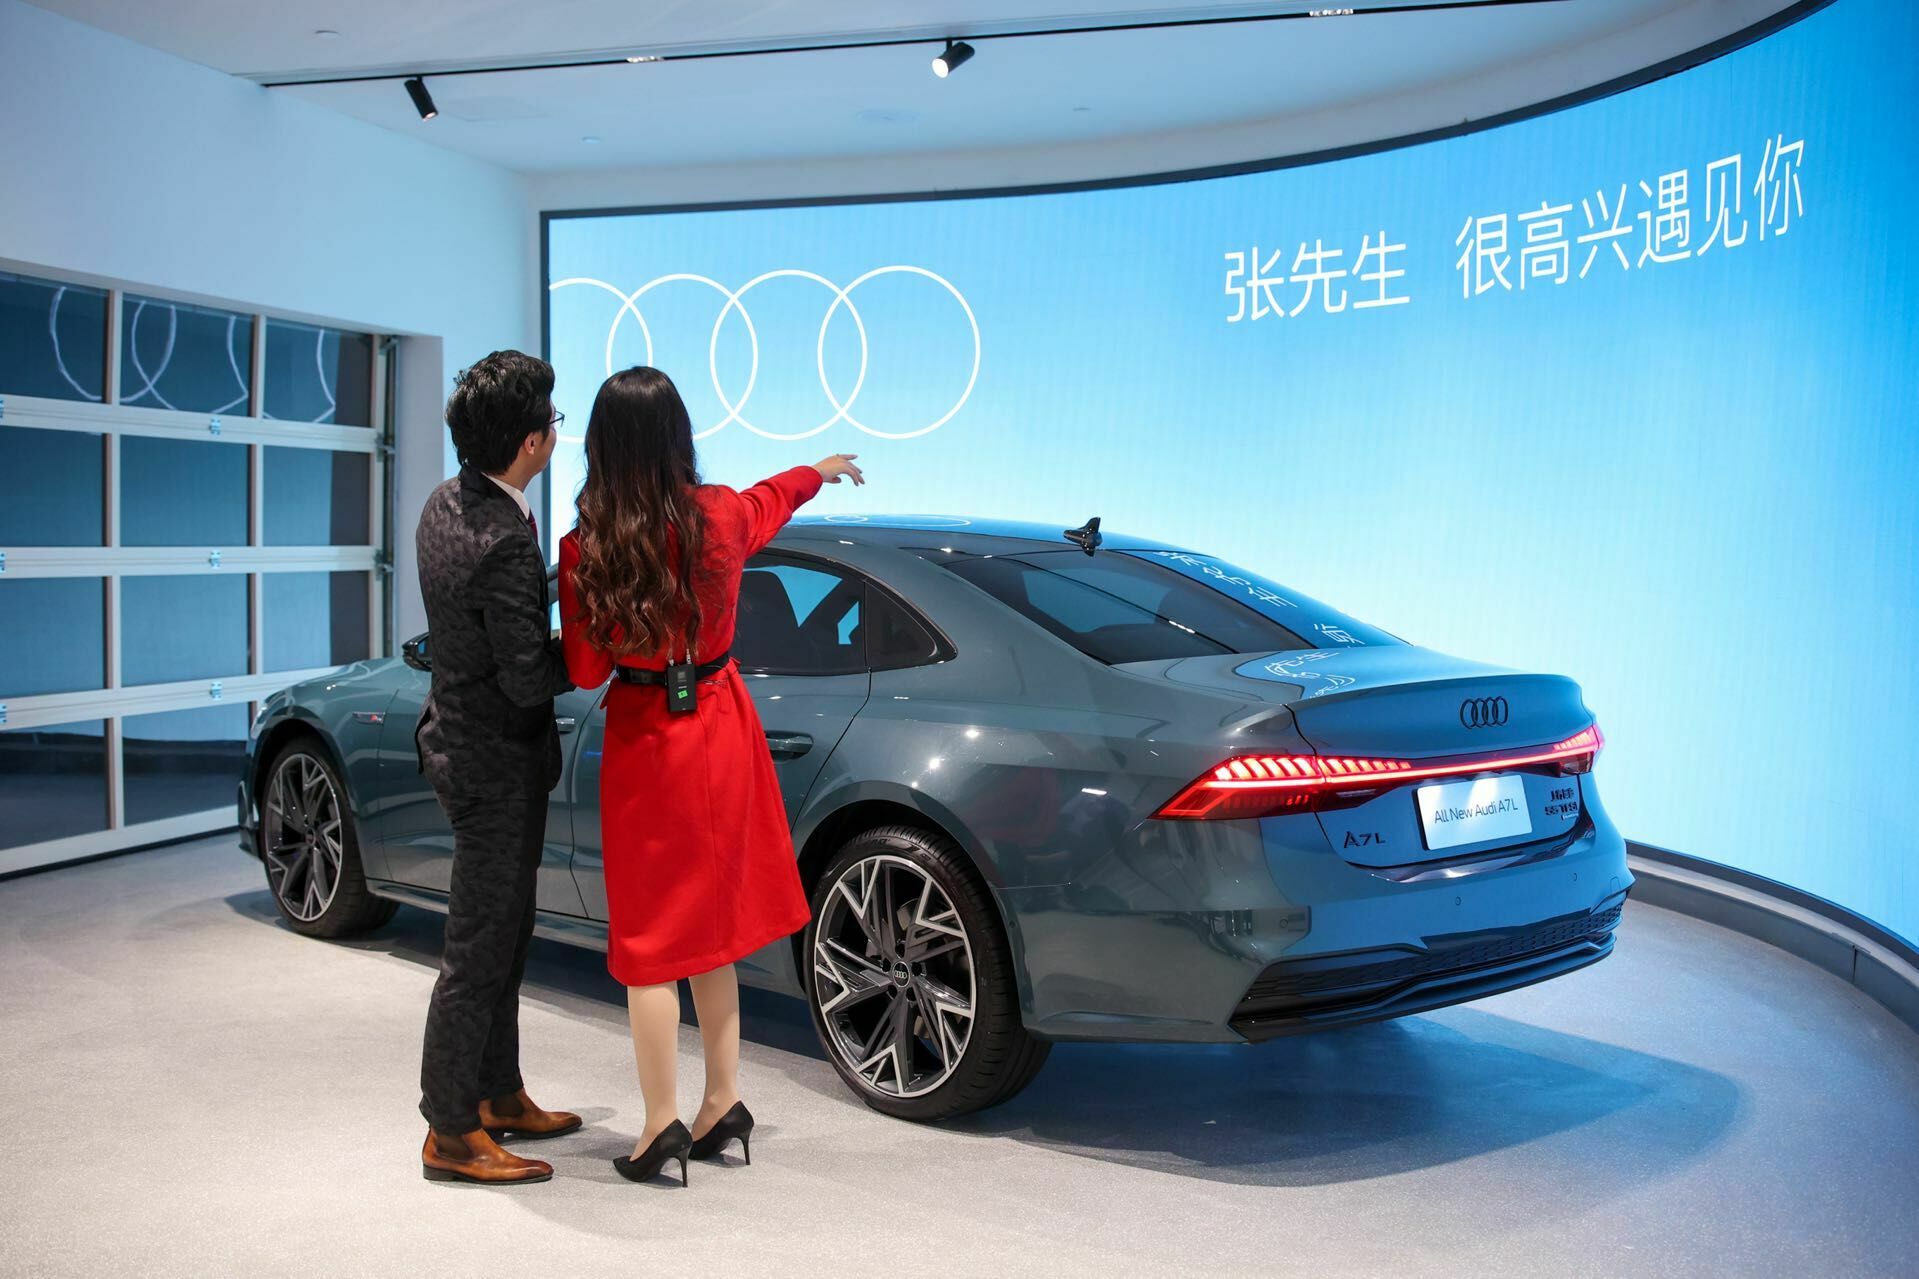 SAIC Audi opens the world’s largest Audi store in Shanghai